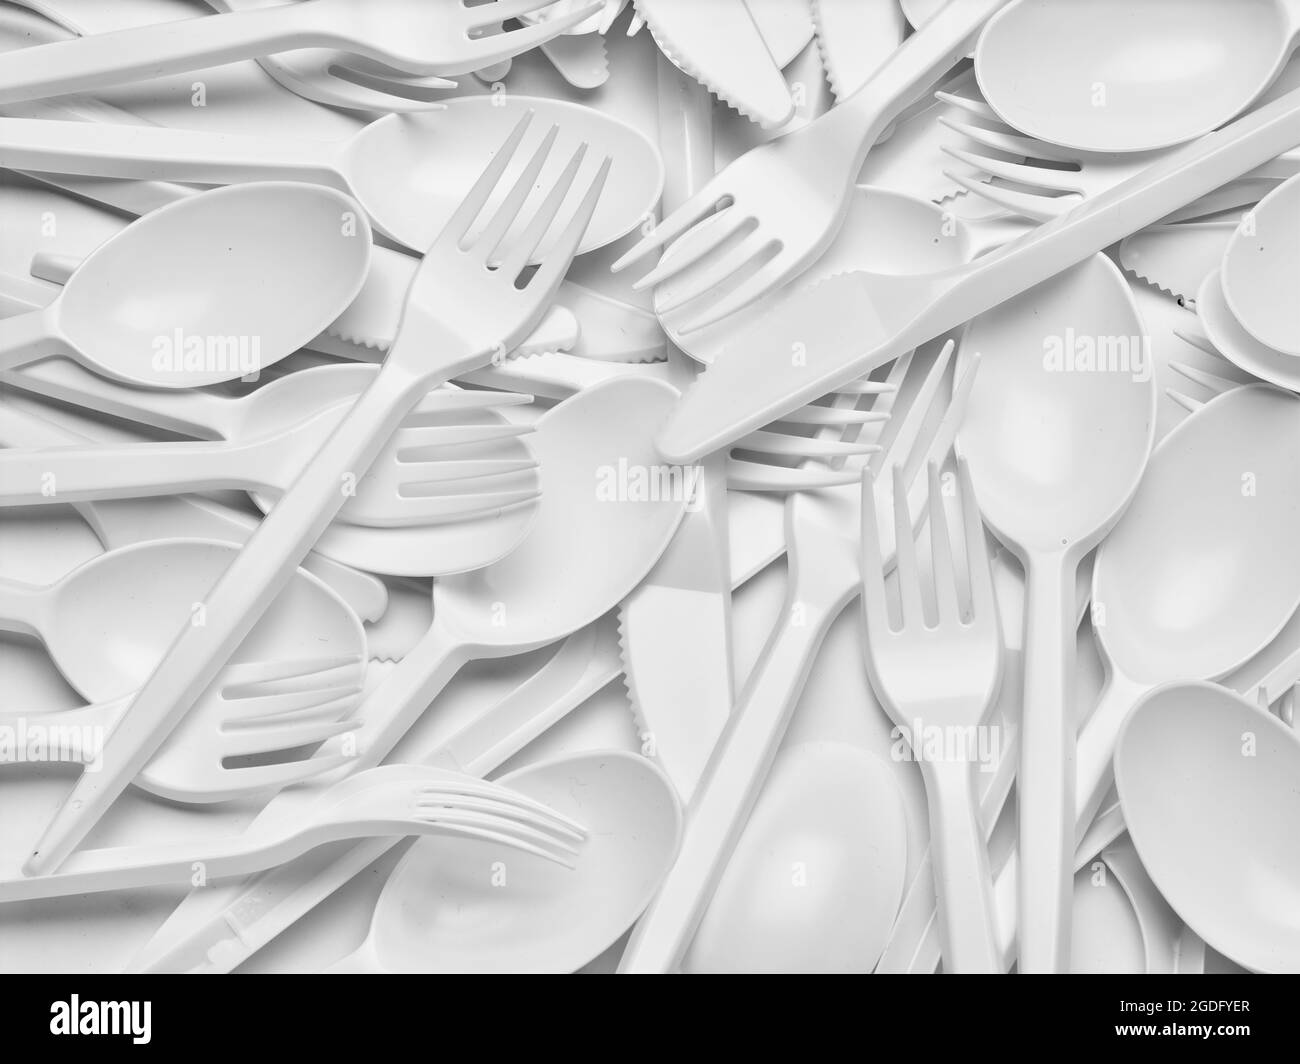 plastic cutlery spoon fork knife utensil recycling disposable Stock Photo